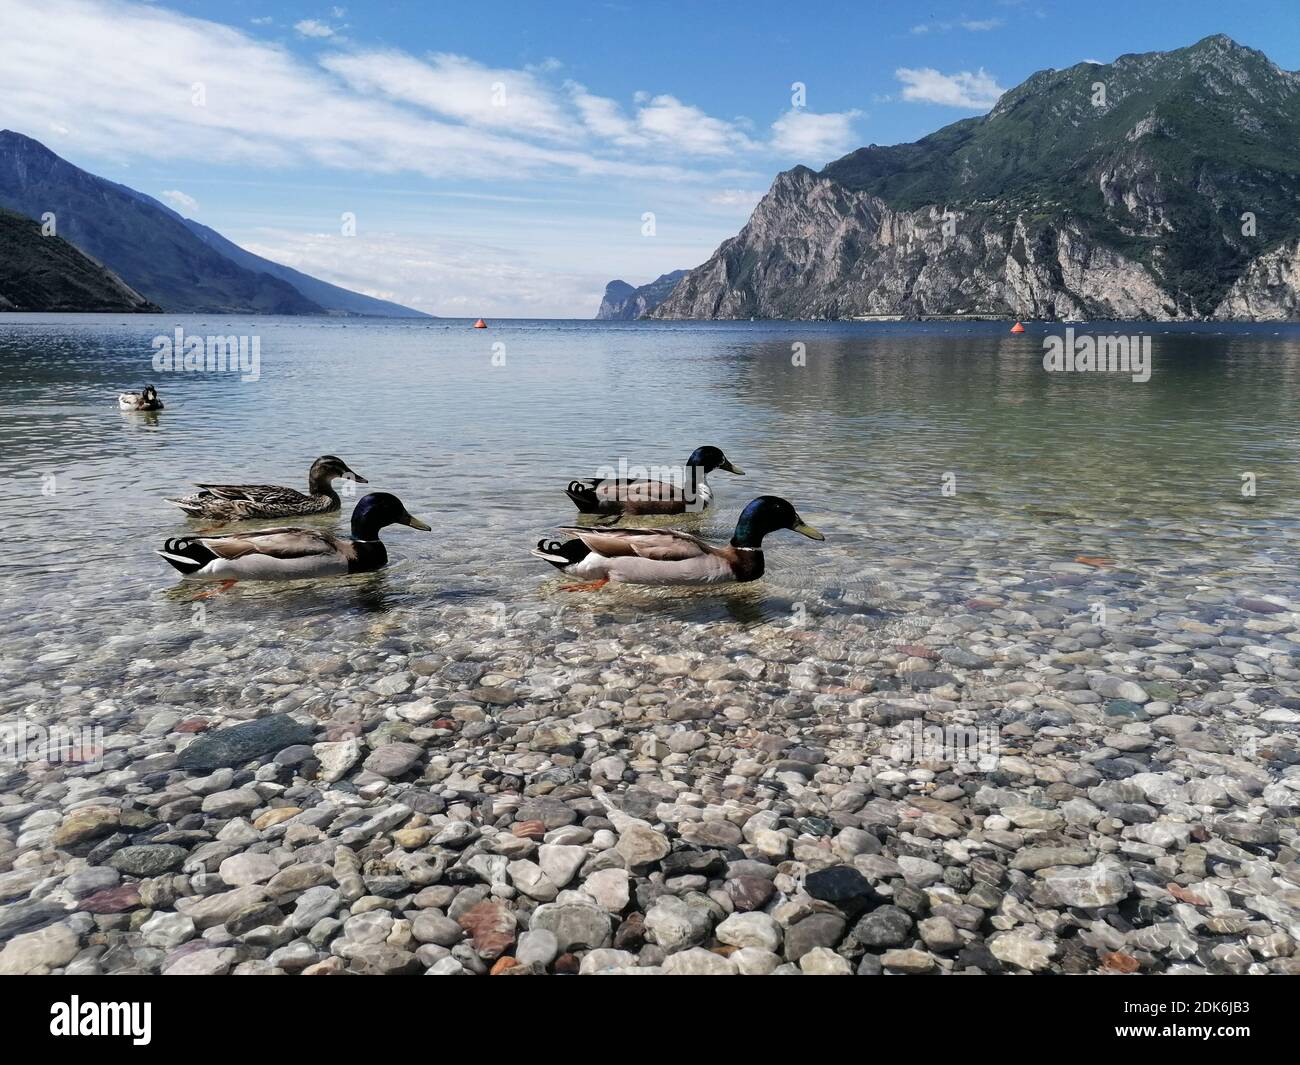 View Of Ducks On Rock By Lake Against Sky Stock Photo